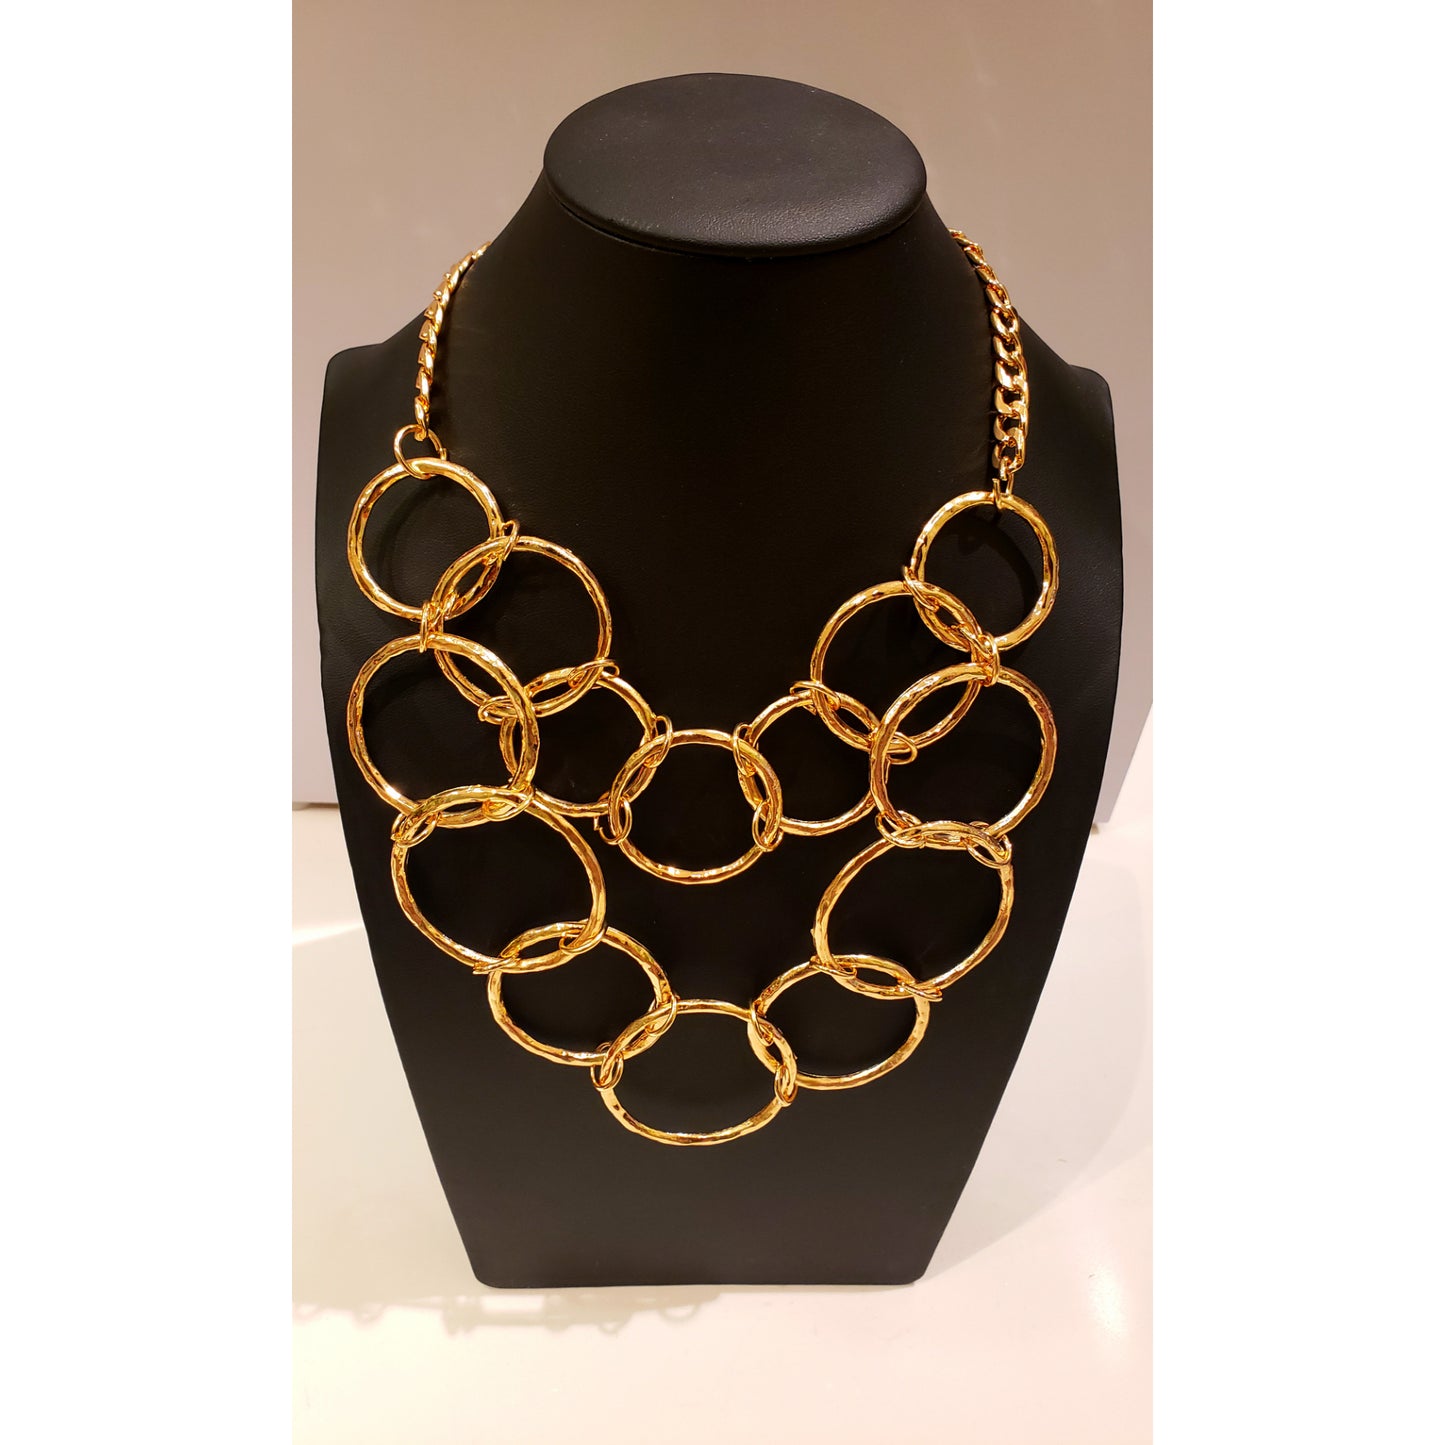 Running in Circles Statement Necklace